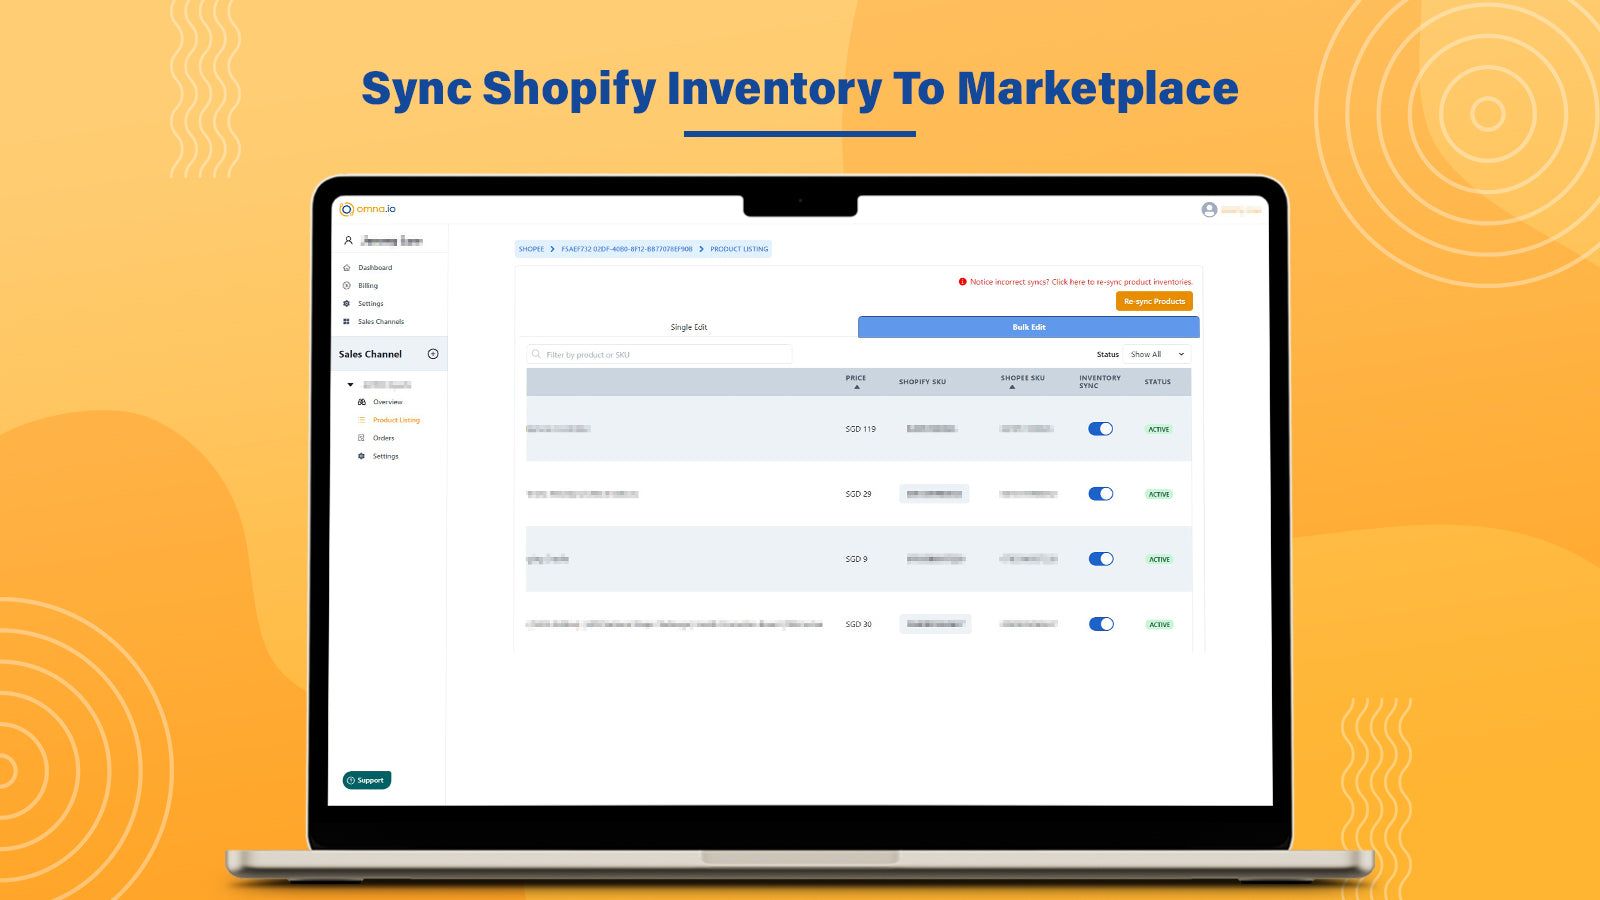 Sync Shopify Inventory To Marketplace